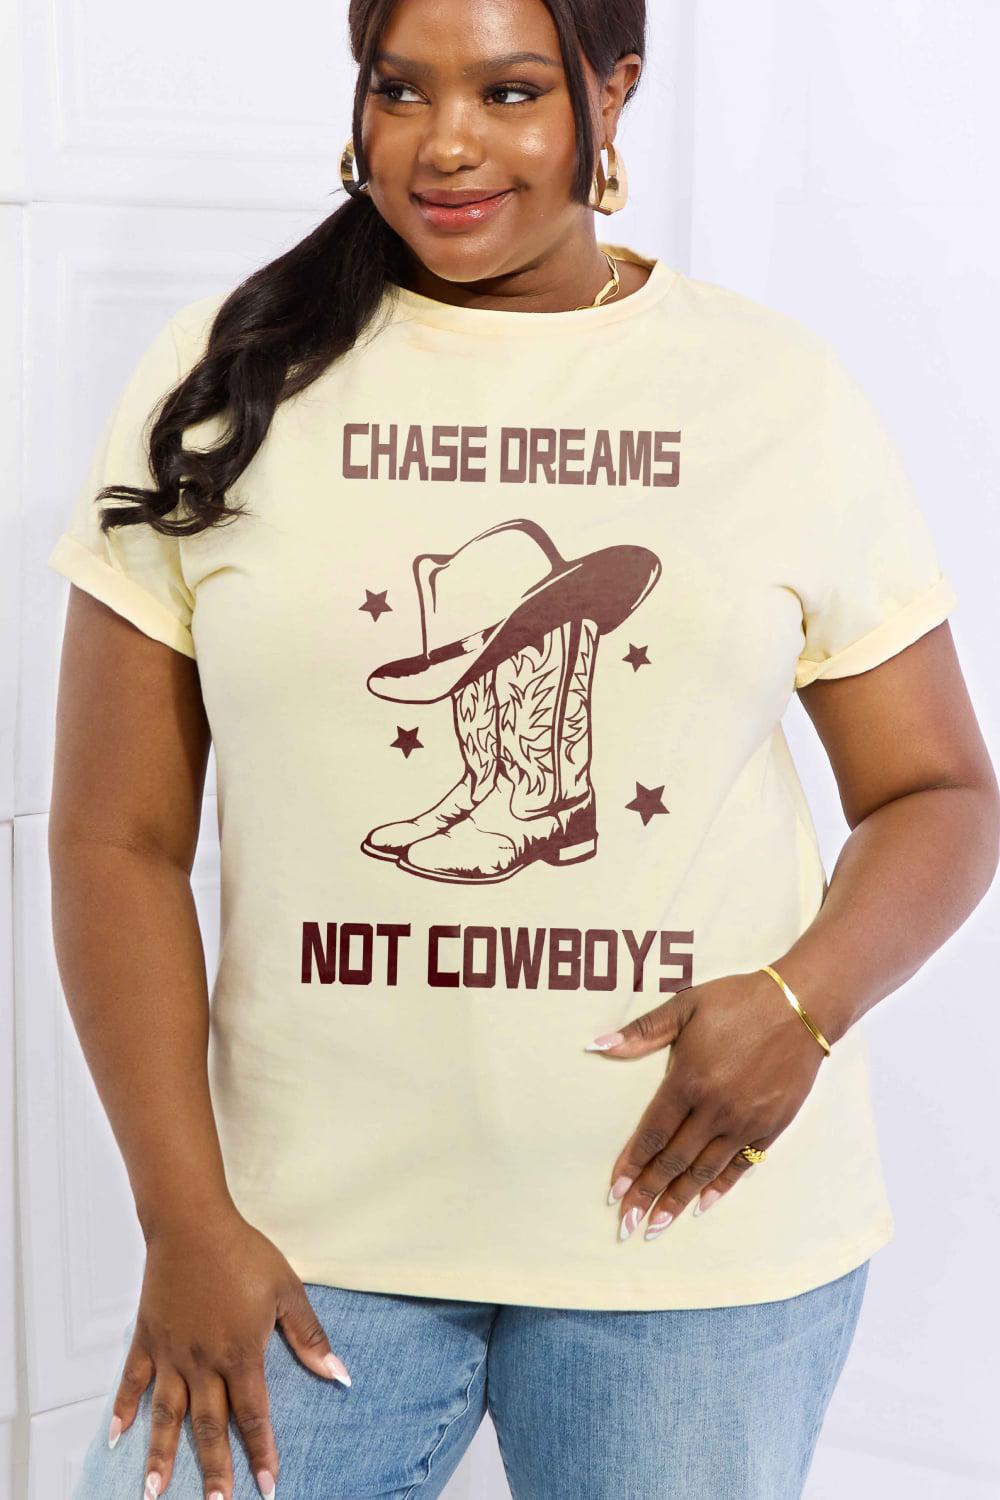 Simply Love Full Size CHASE DREAMS NOT COWBOYS Graphic Cotton Tee BLUE ZONE PLANET